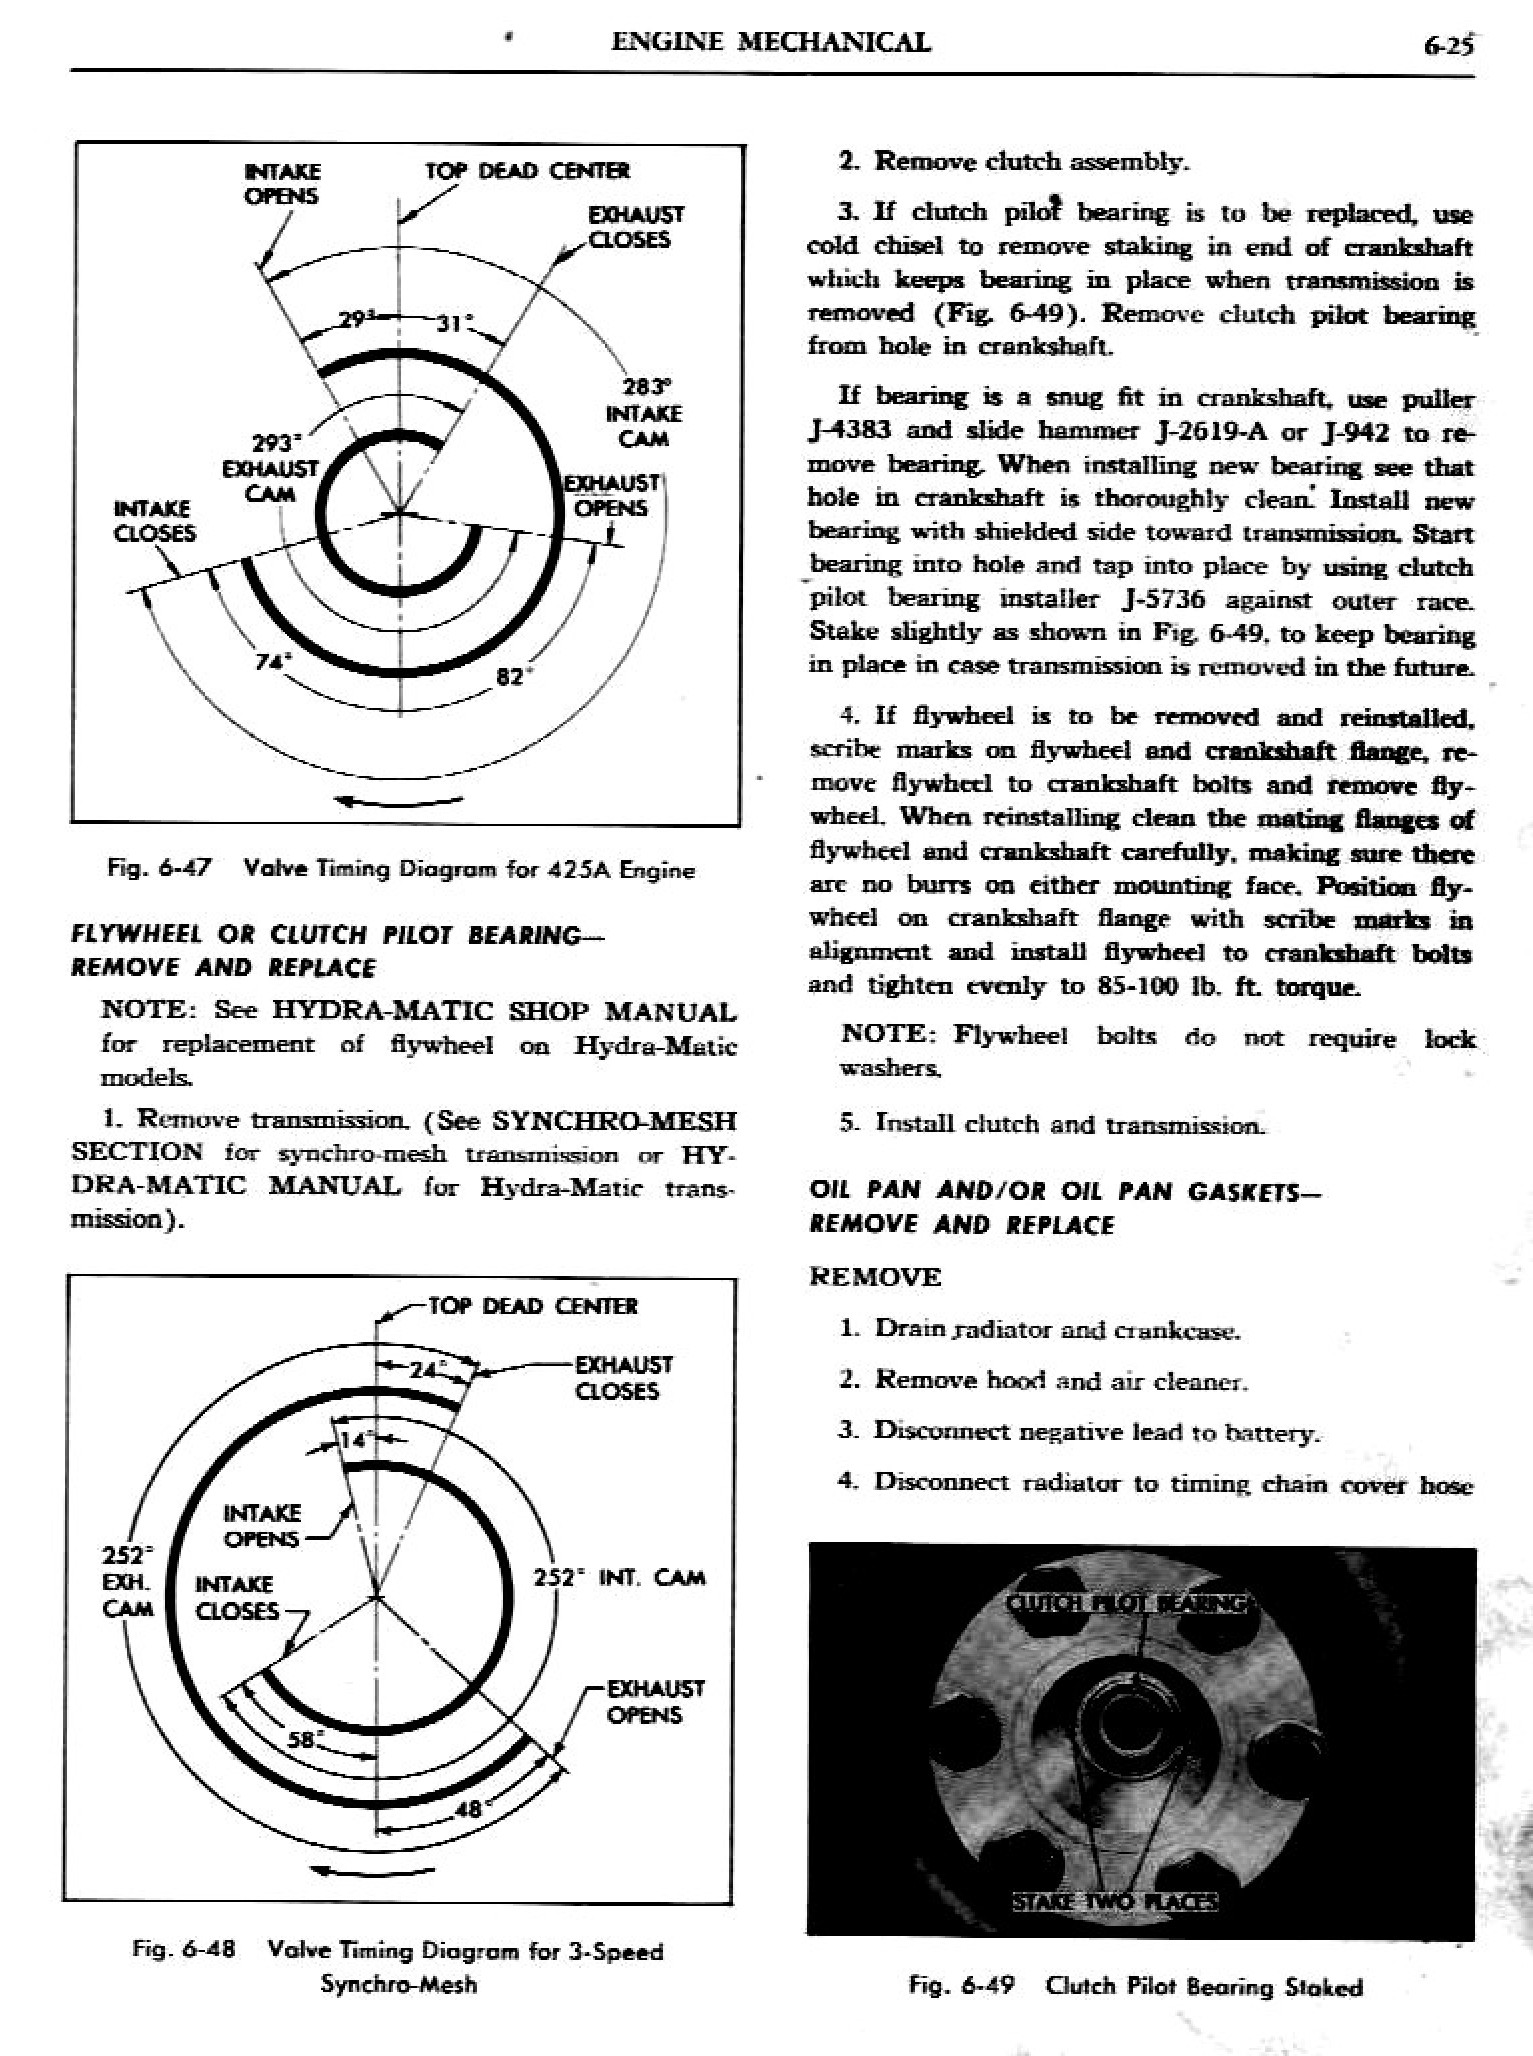 1962 Pontiac Chassis Service Manual- Engine Page 26 of 63